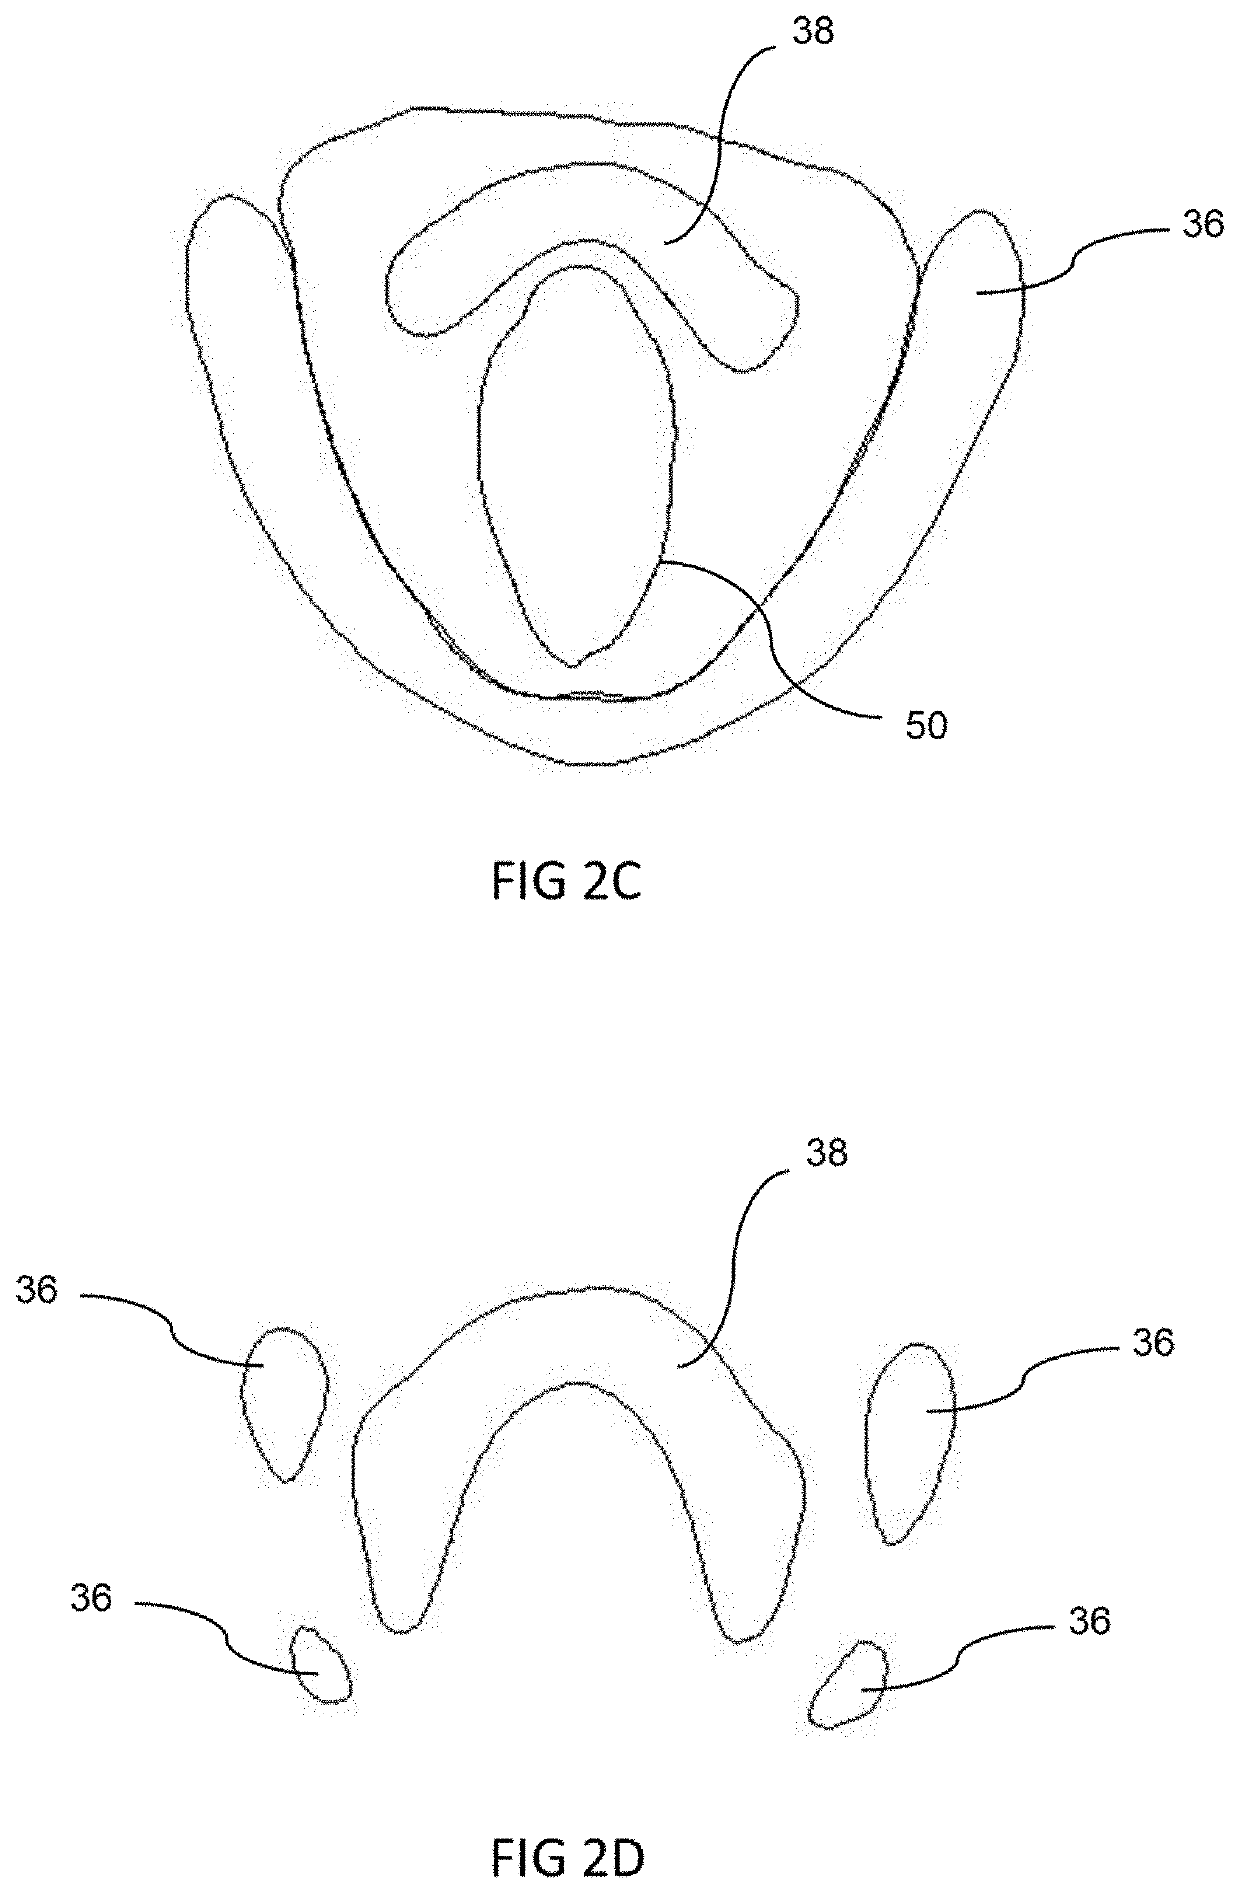 Simulator for practicing surgery or procedures involving the neck and airway and method of use thereof